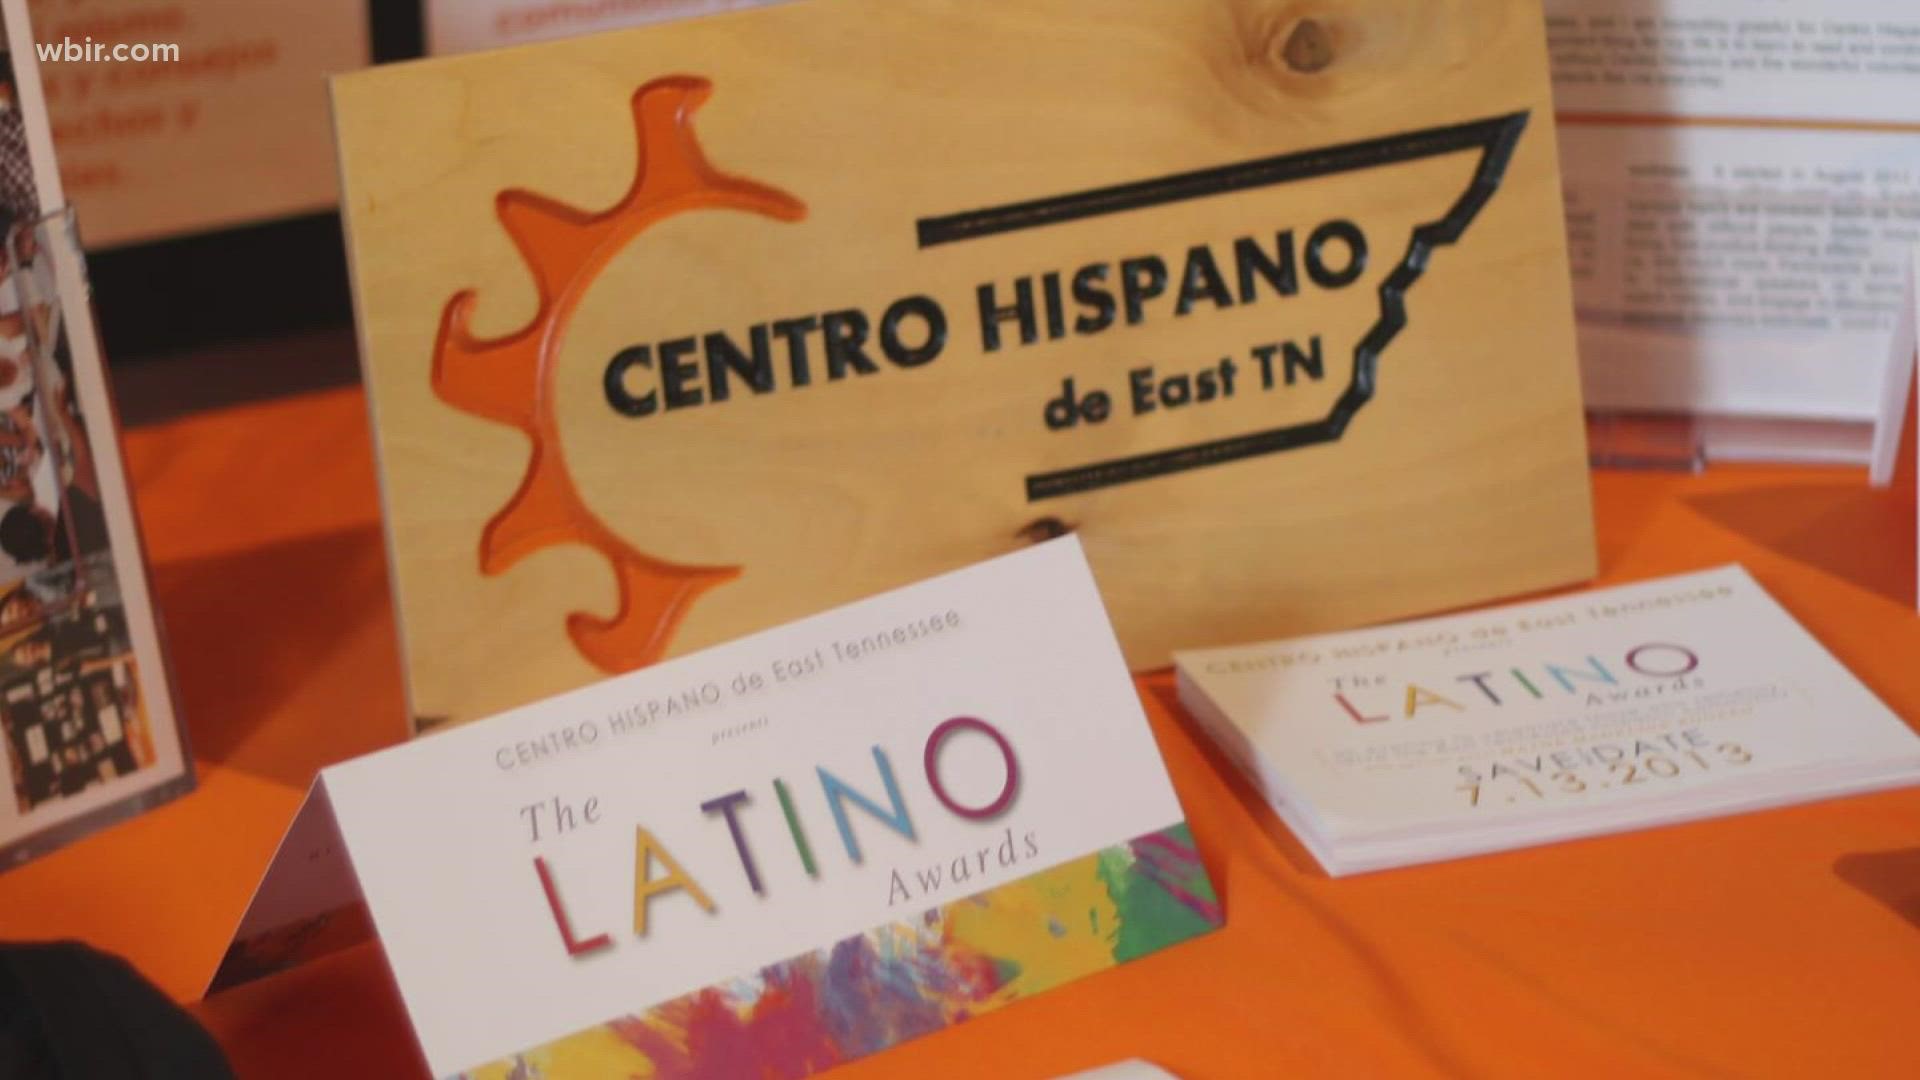 Centro Hispano partnered with Pellissippi State Community College to bring more opportunities to the East Tennessee Latino community.